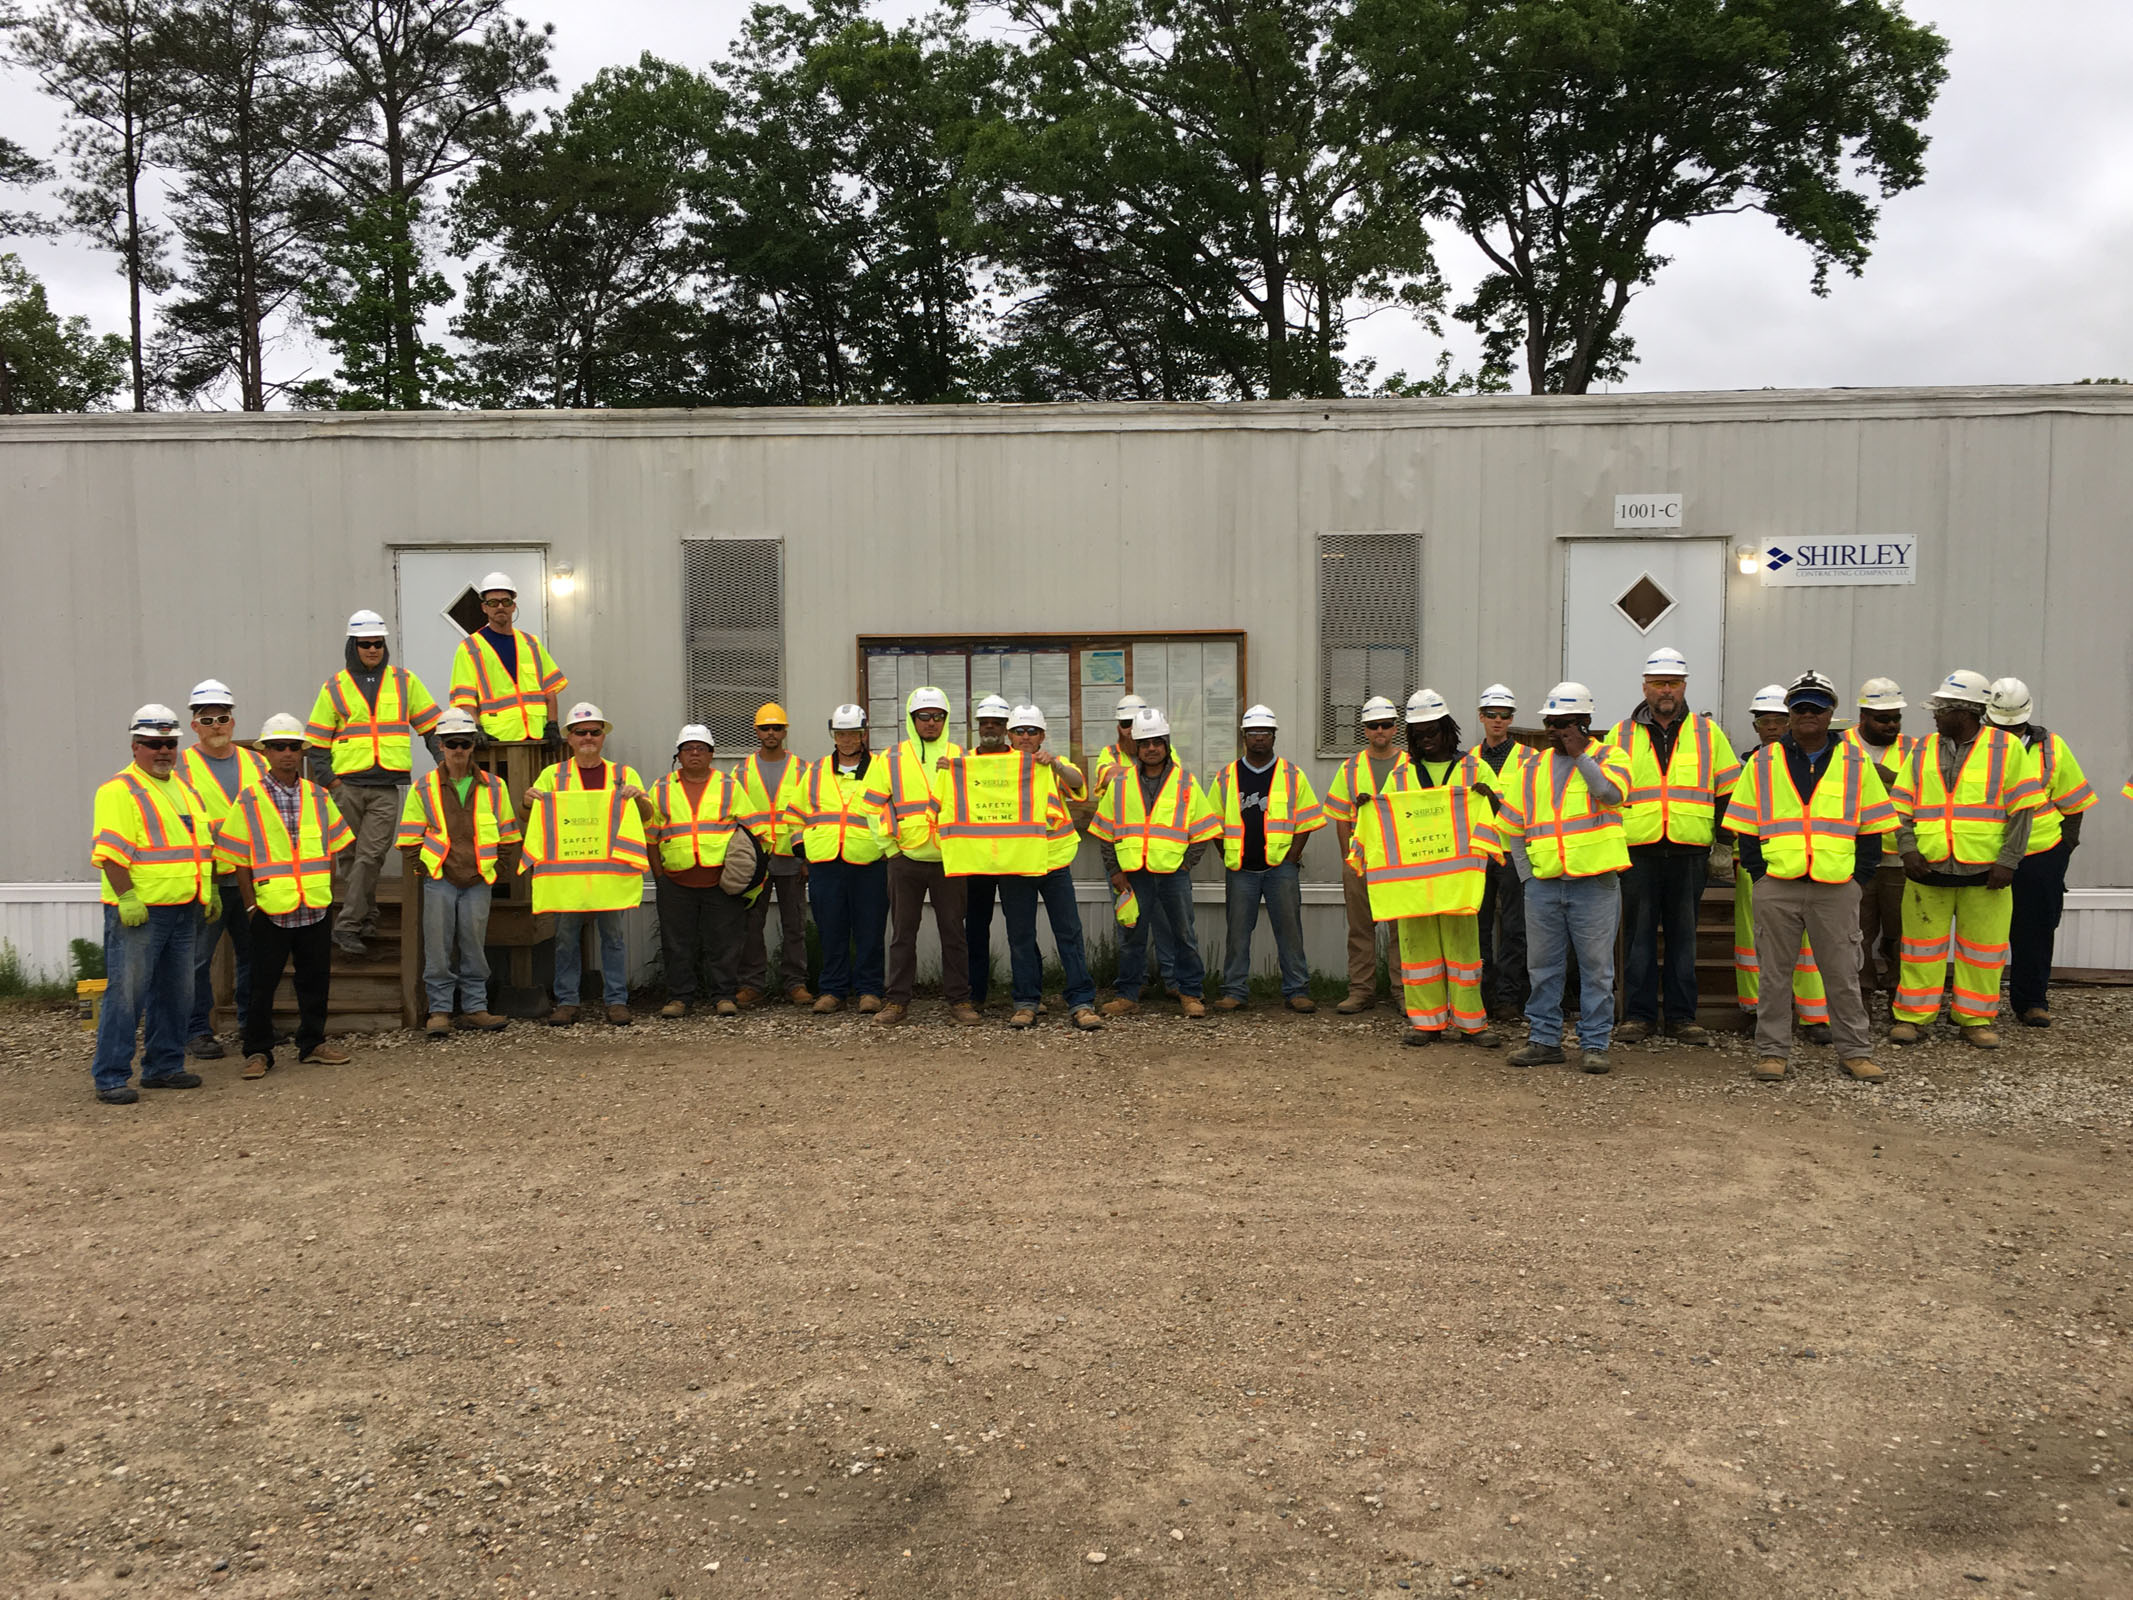 Workers in yellow protective vest posing for photo in front of trailer